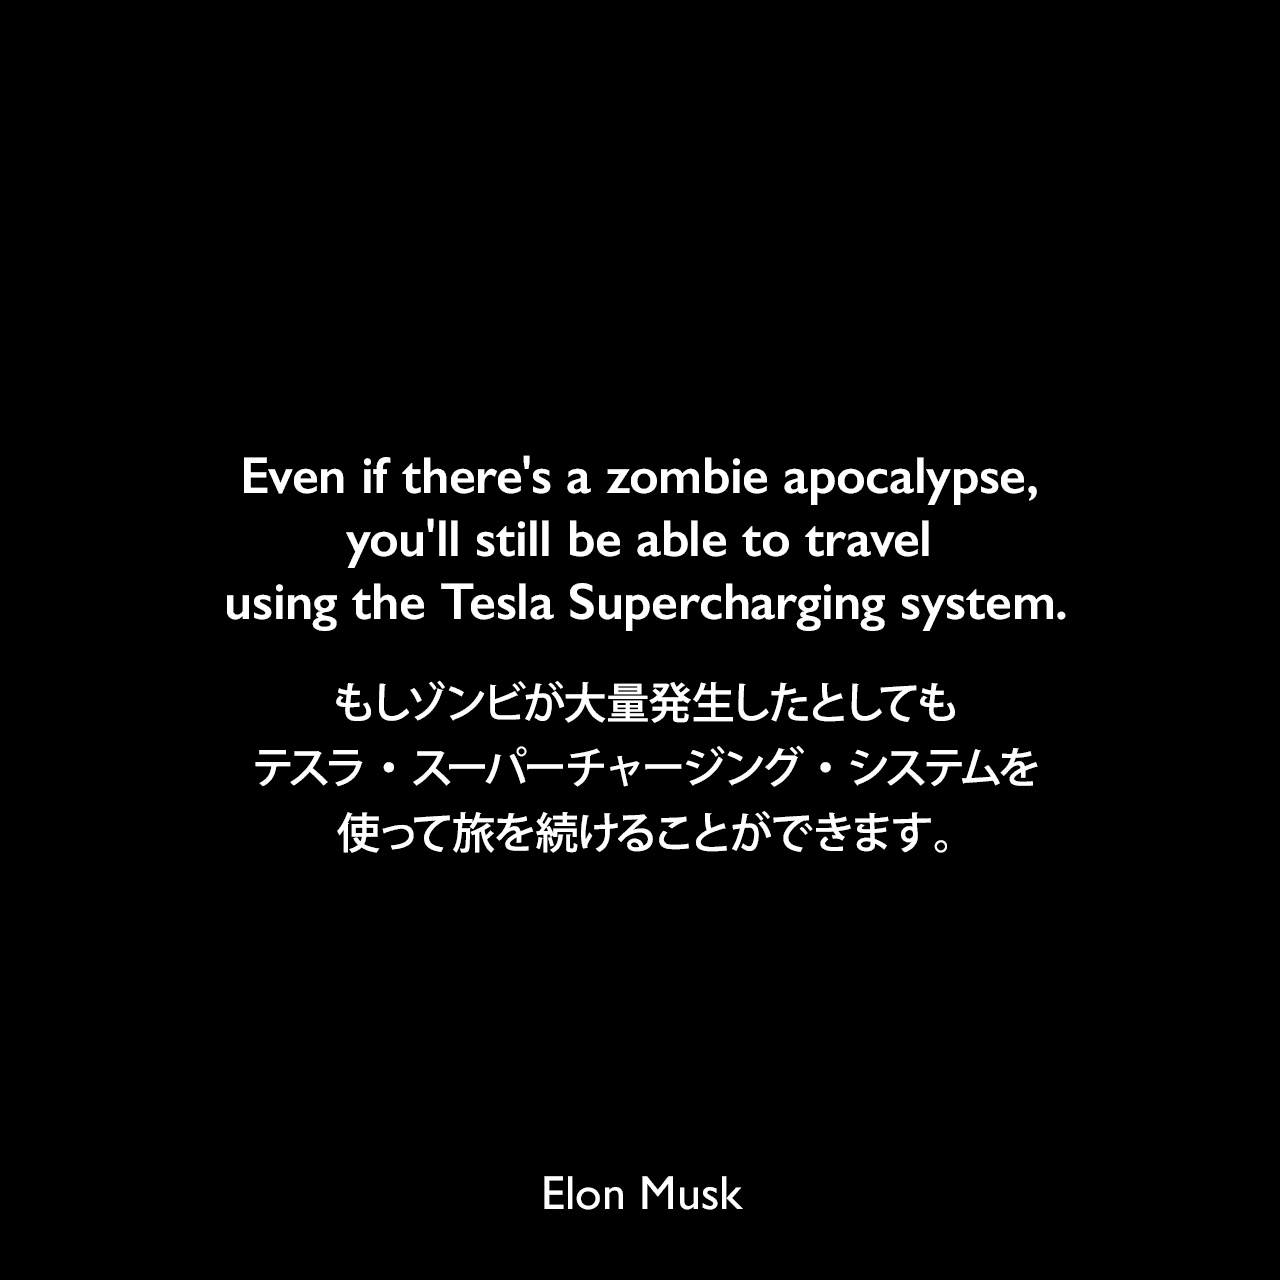 Even if there's a zombie apocalypse, you'll still be able to travel using the Tesla Supercharging system.もしゾンビが大量発生したとしても、テスラ・スーパーチャージング・システムを使って旅を続けることができます。- 2013年5月のYahoo!記事「Tesla speeds up free nationwide charging network」よりElon Musk